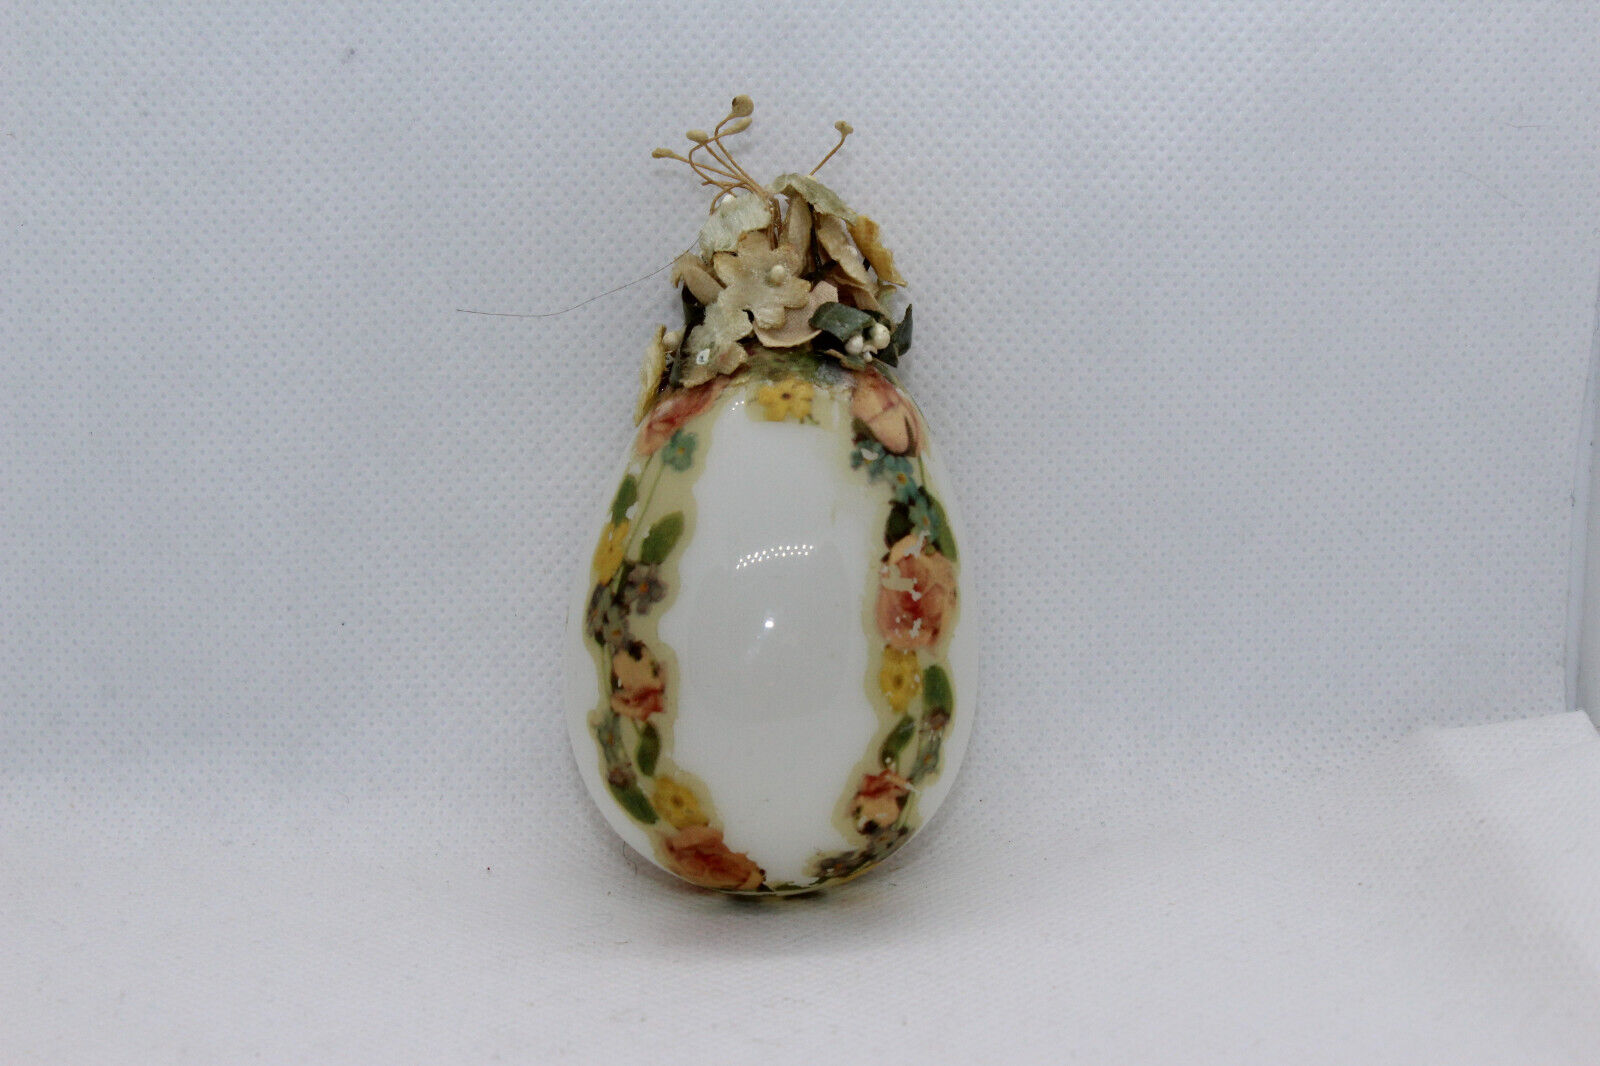 RARE Antique Victorian Milk Glass Blown Easter Egg FANCY DECORATED FLOWERS DECAL